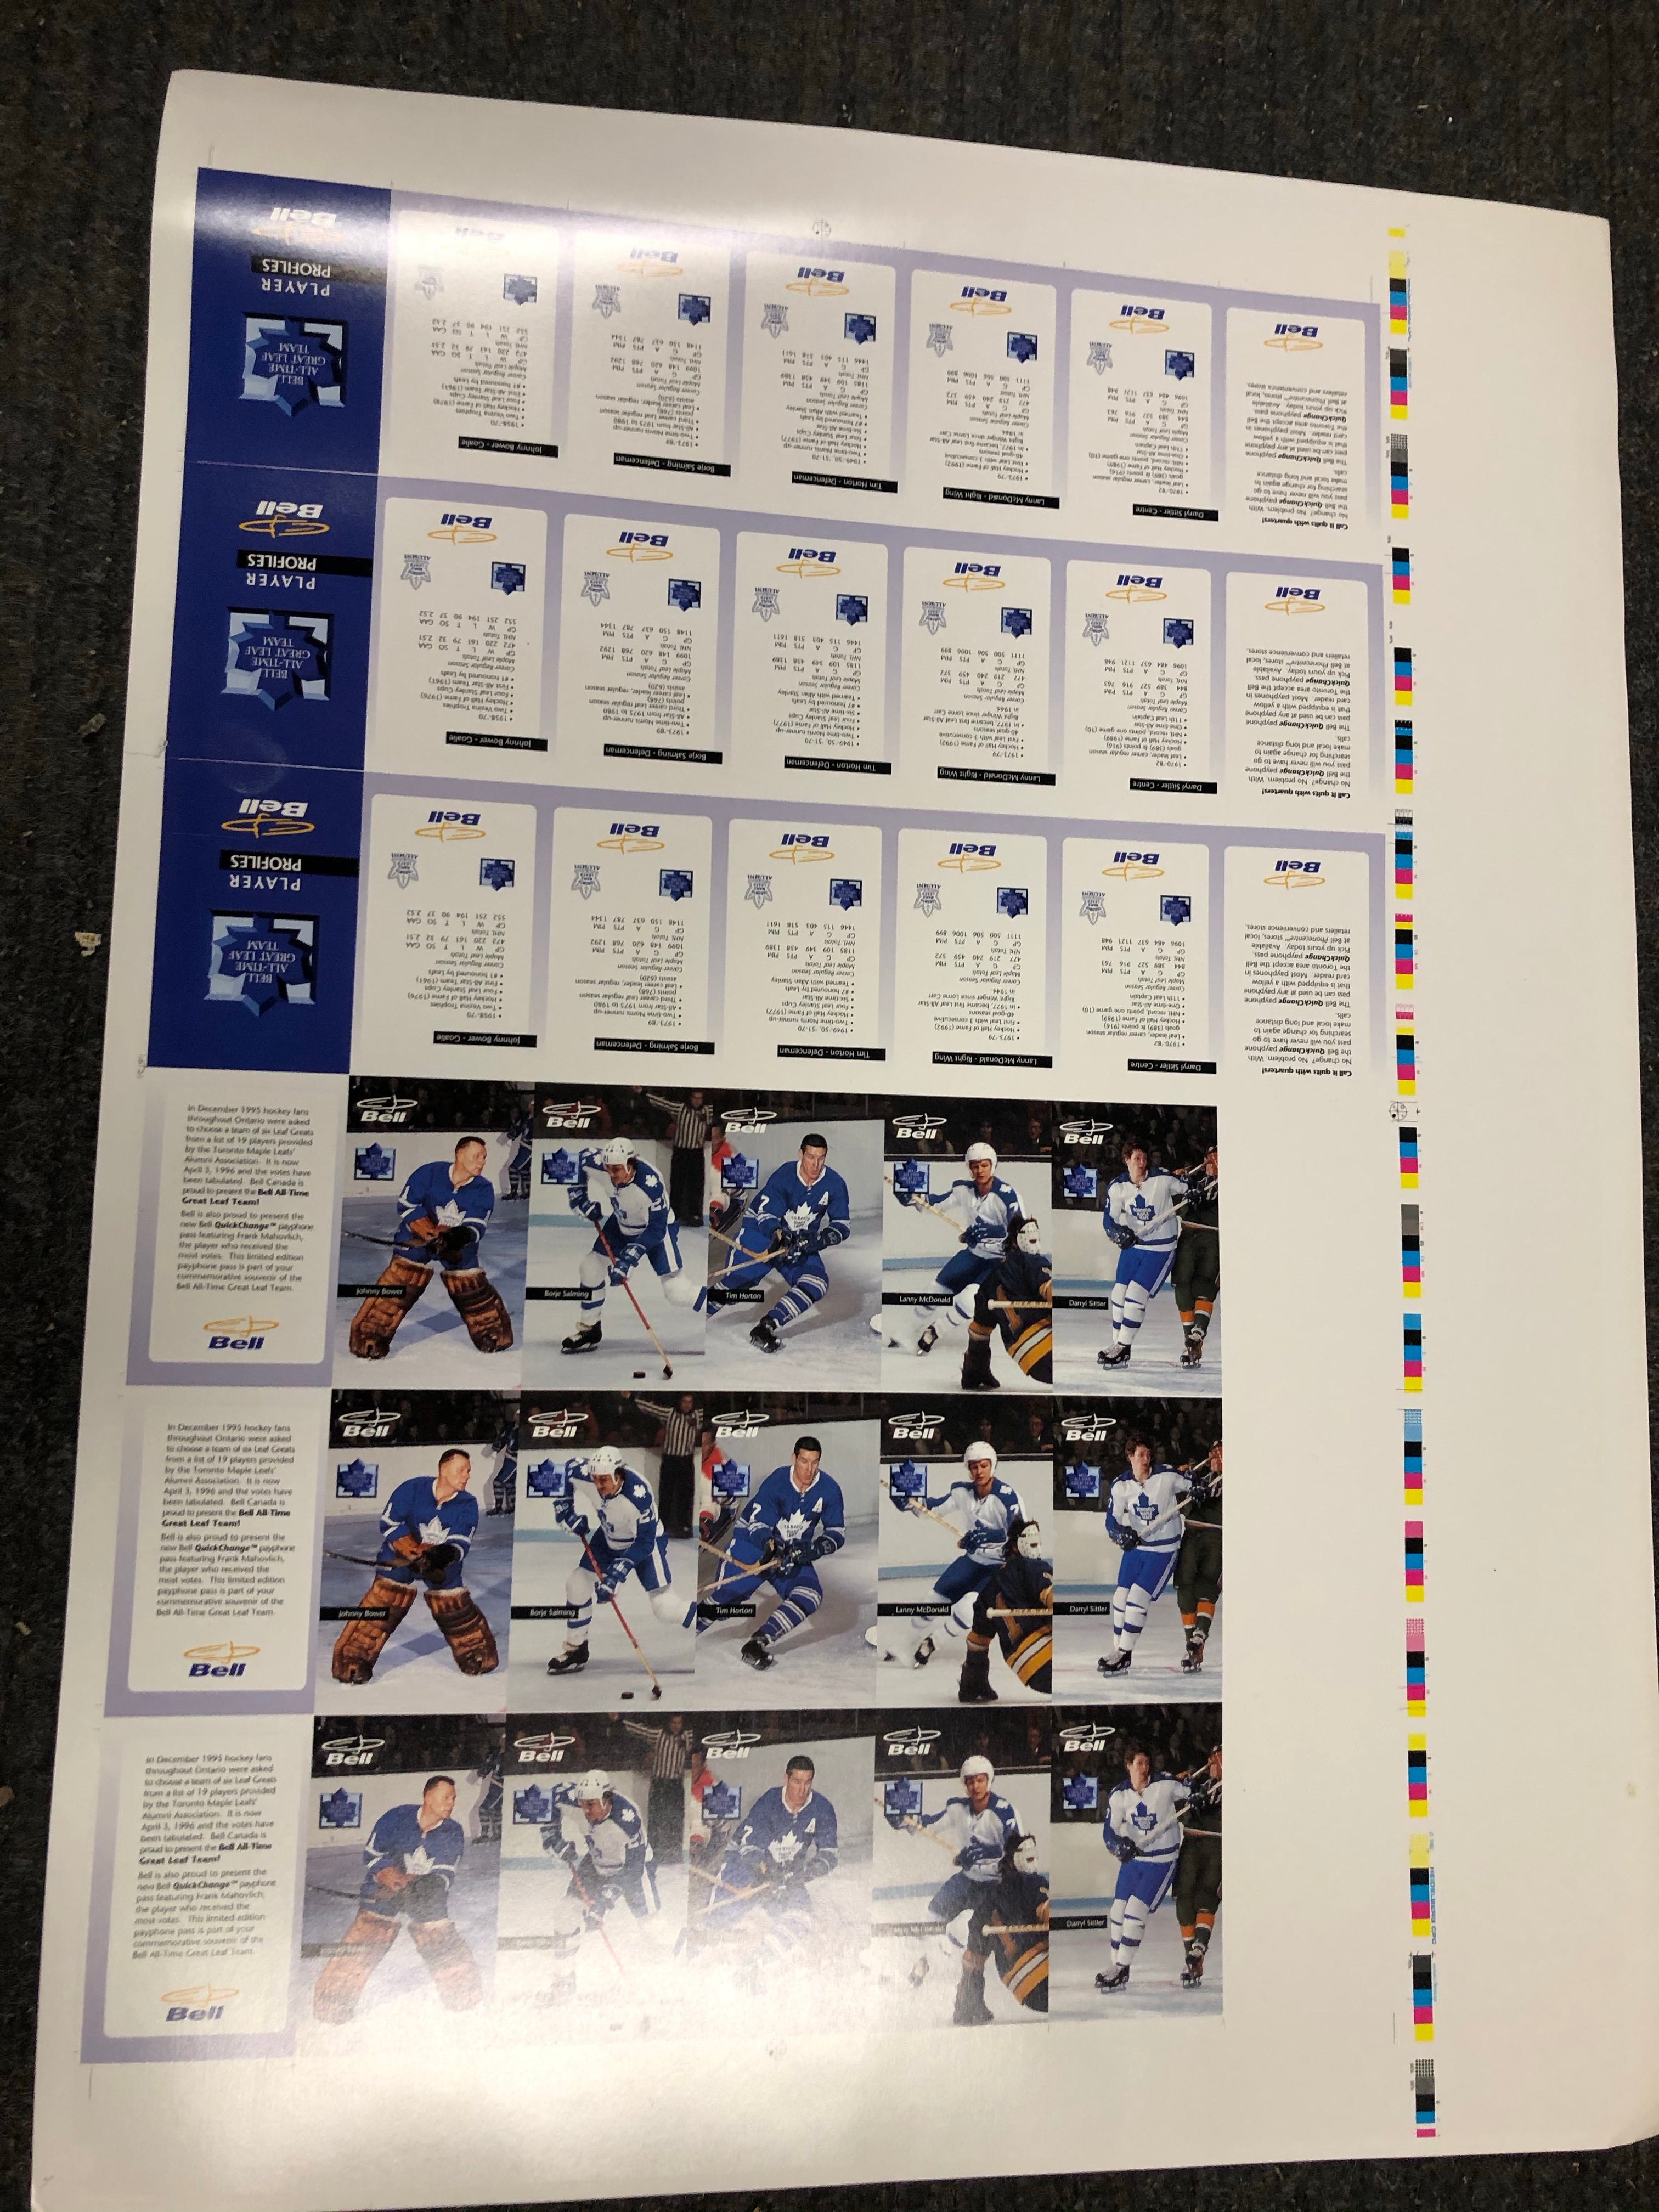 Toronto Maple Leafs hockey rare Bell Mobility uncut hockey cards sheet 1996